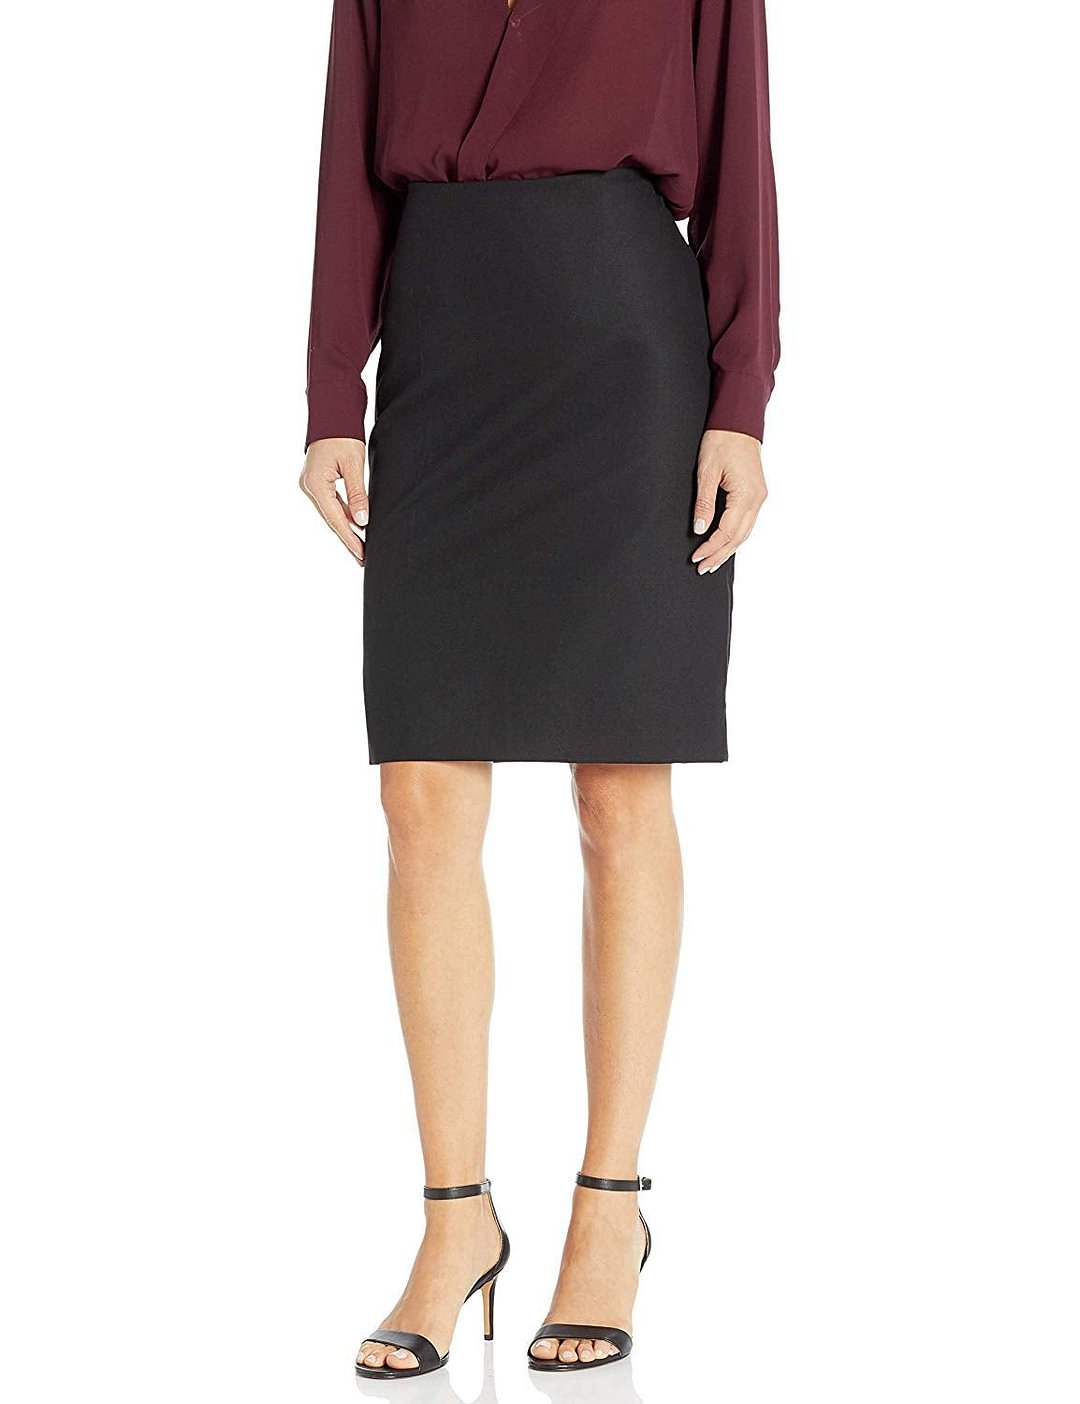 Chaps Women's Stretch Cotton Refined Suiting Pencil Skirt